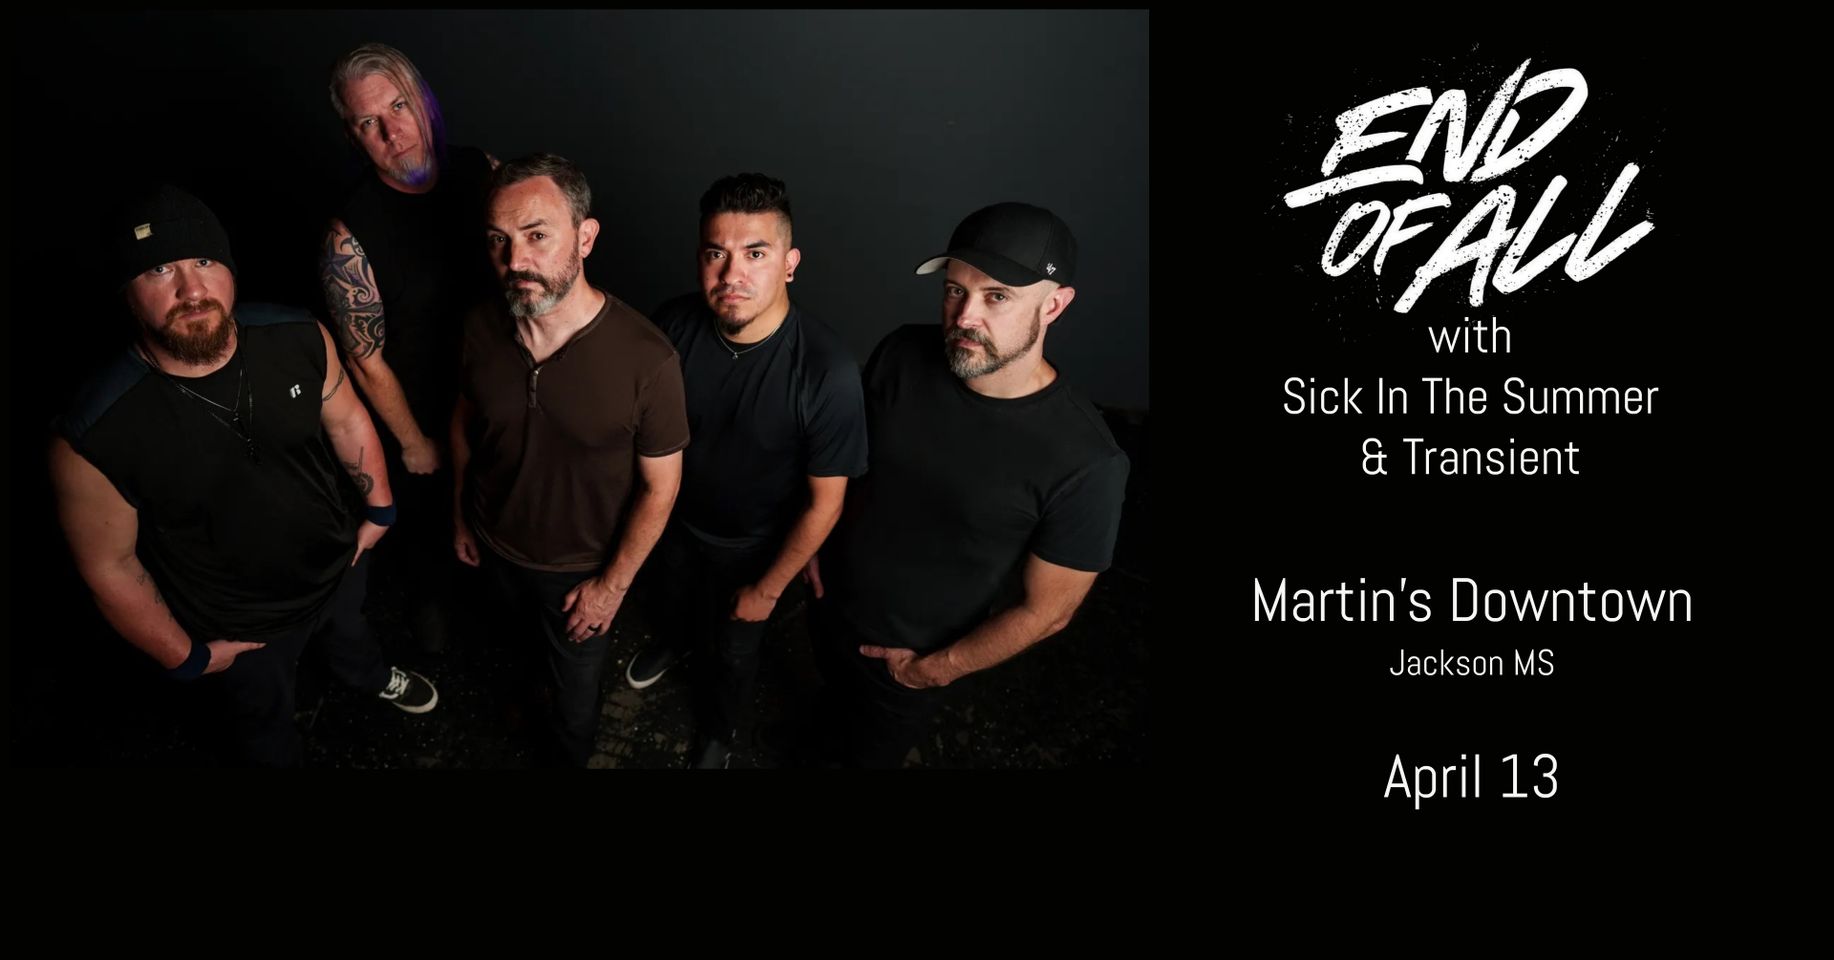 End of All with Transient and Sick in the Summer at Martin’s Downtown